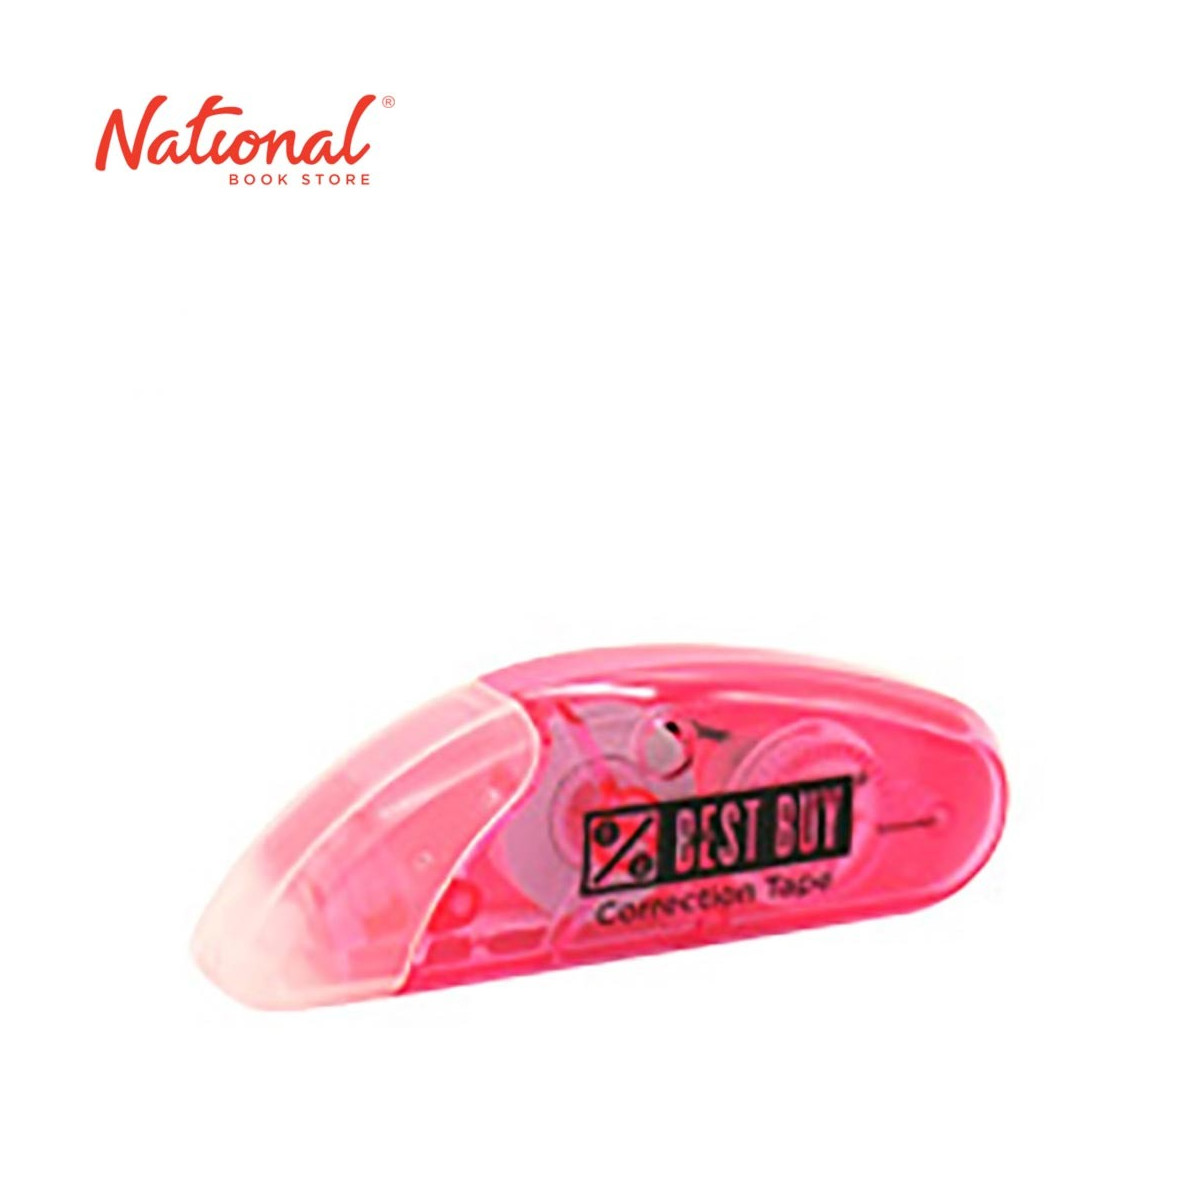 BEST BUY CORRECTION TAPE 5MMX6M PINK